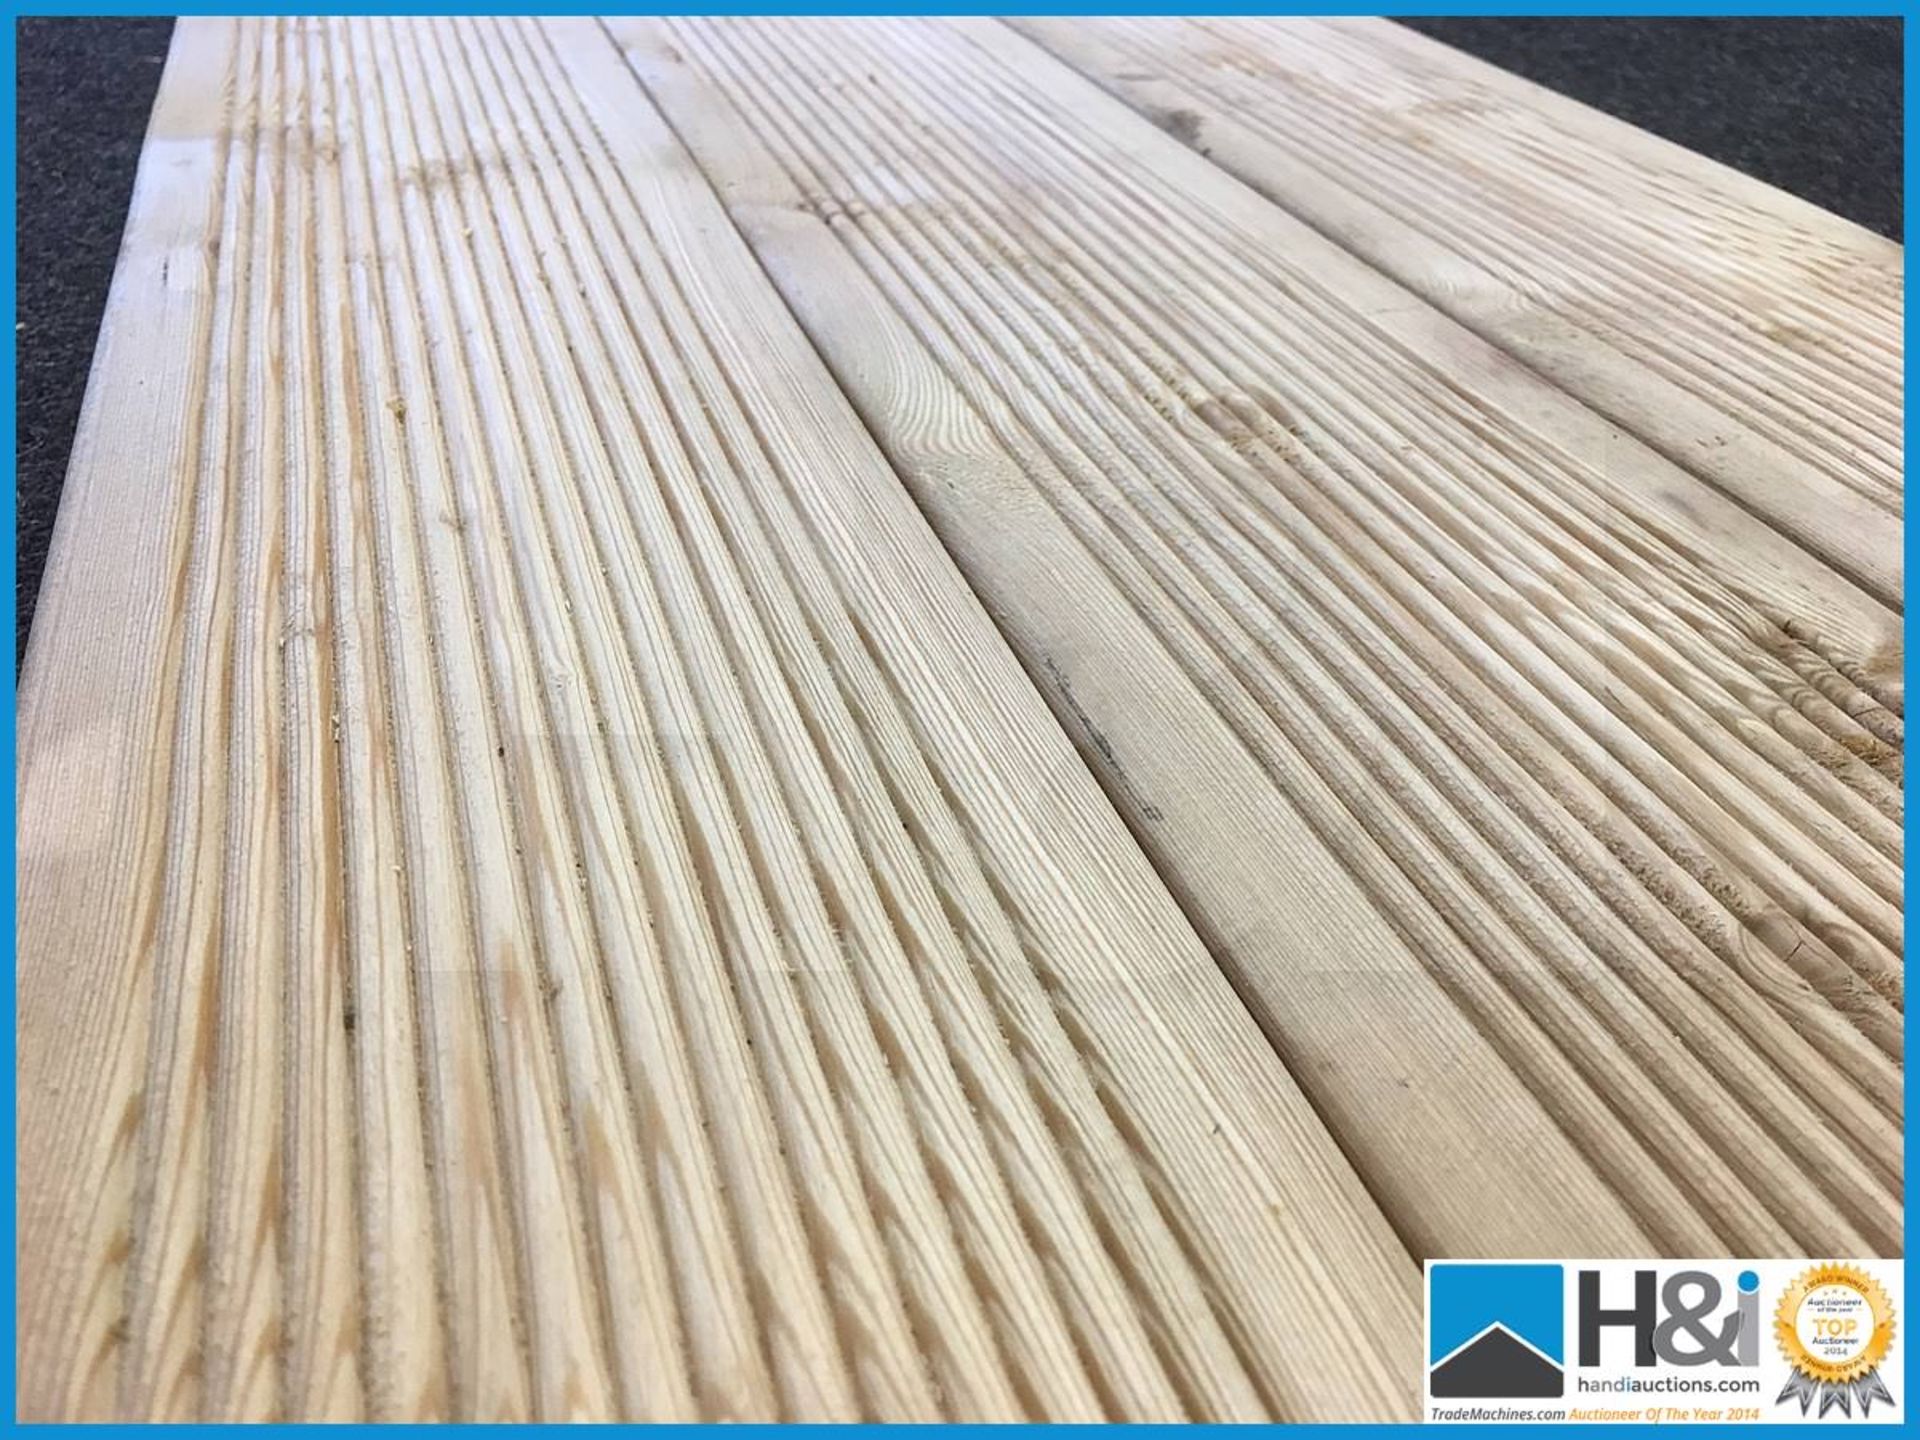 100 sq m of Siberian larch textured decking. New and unused high quality. Requires no treatment - Image 7 of 7